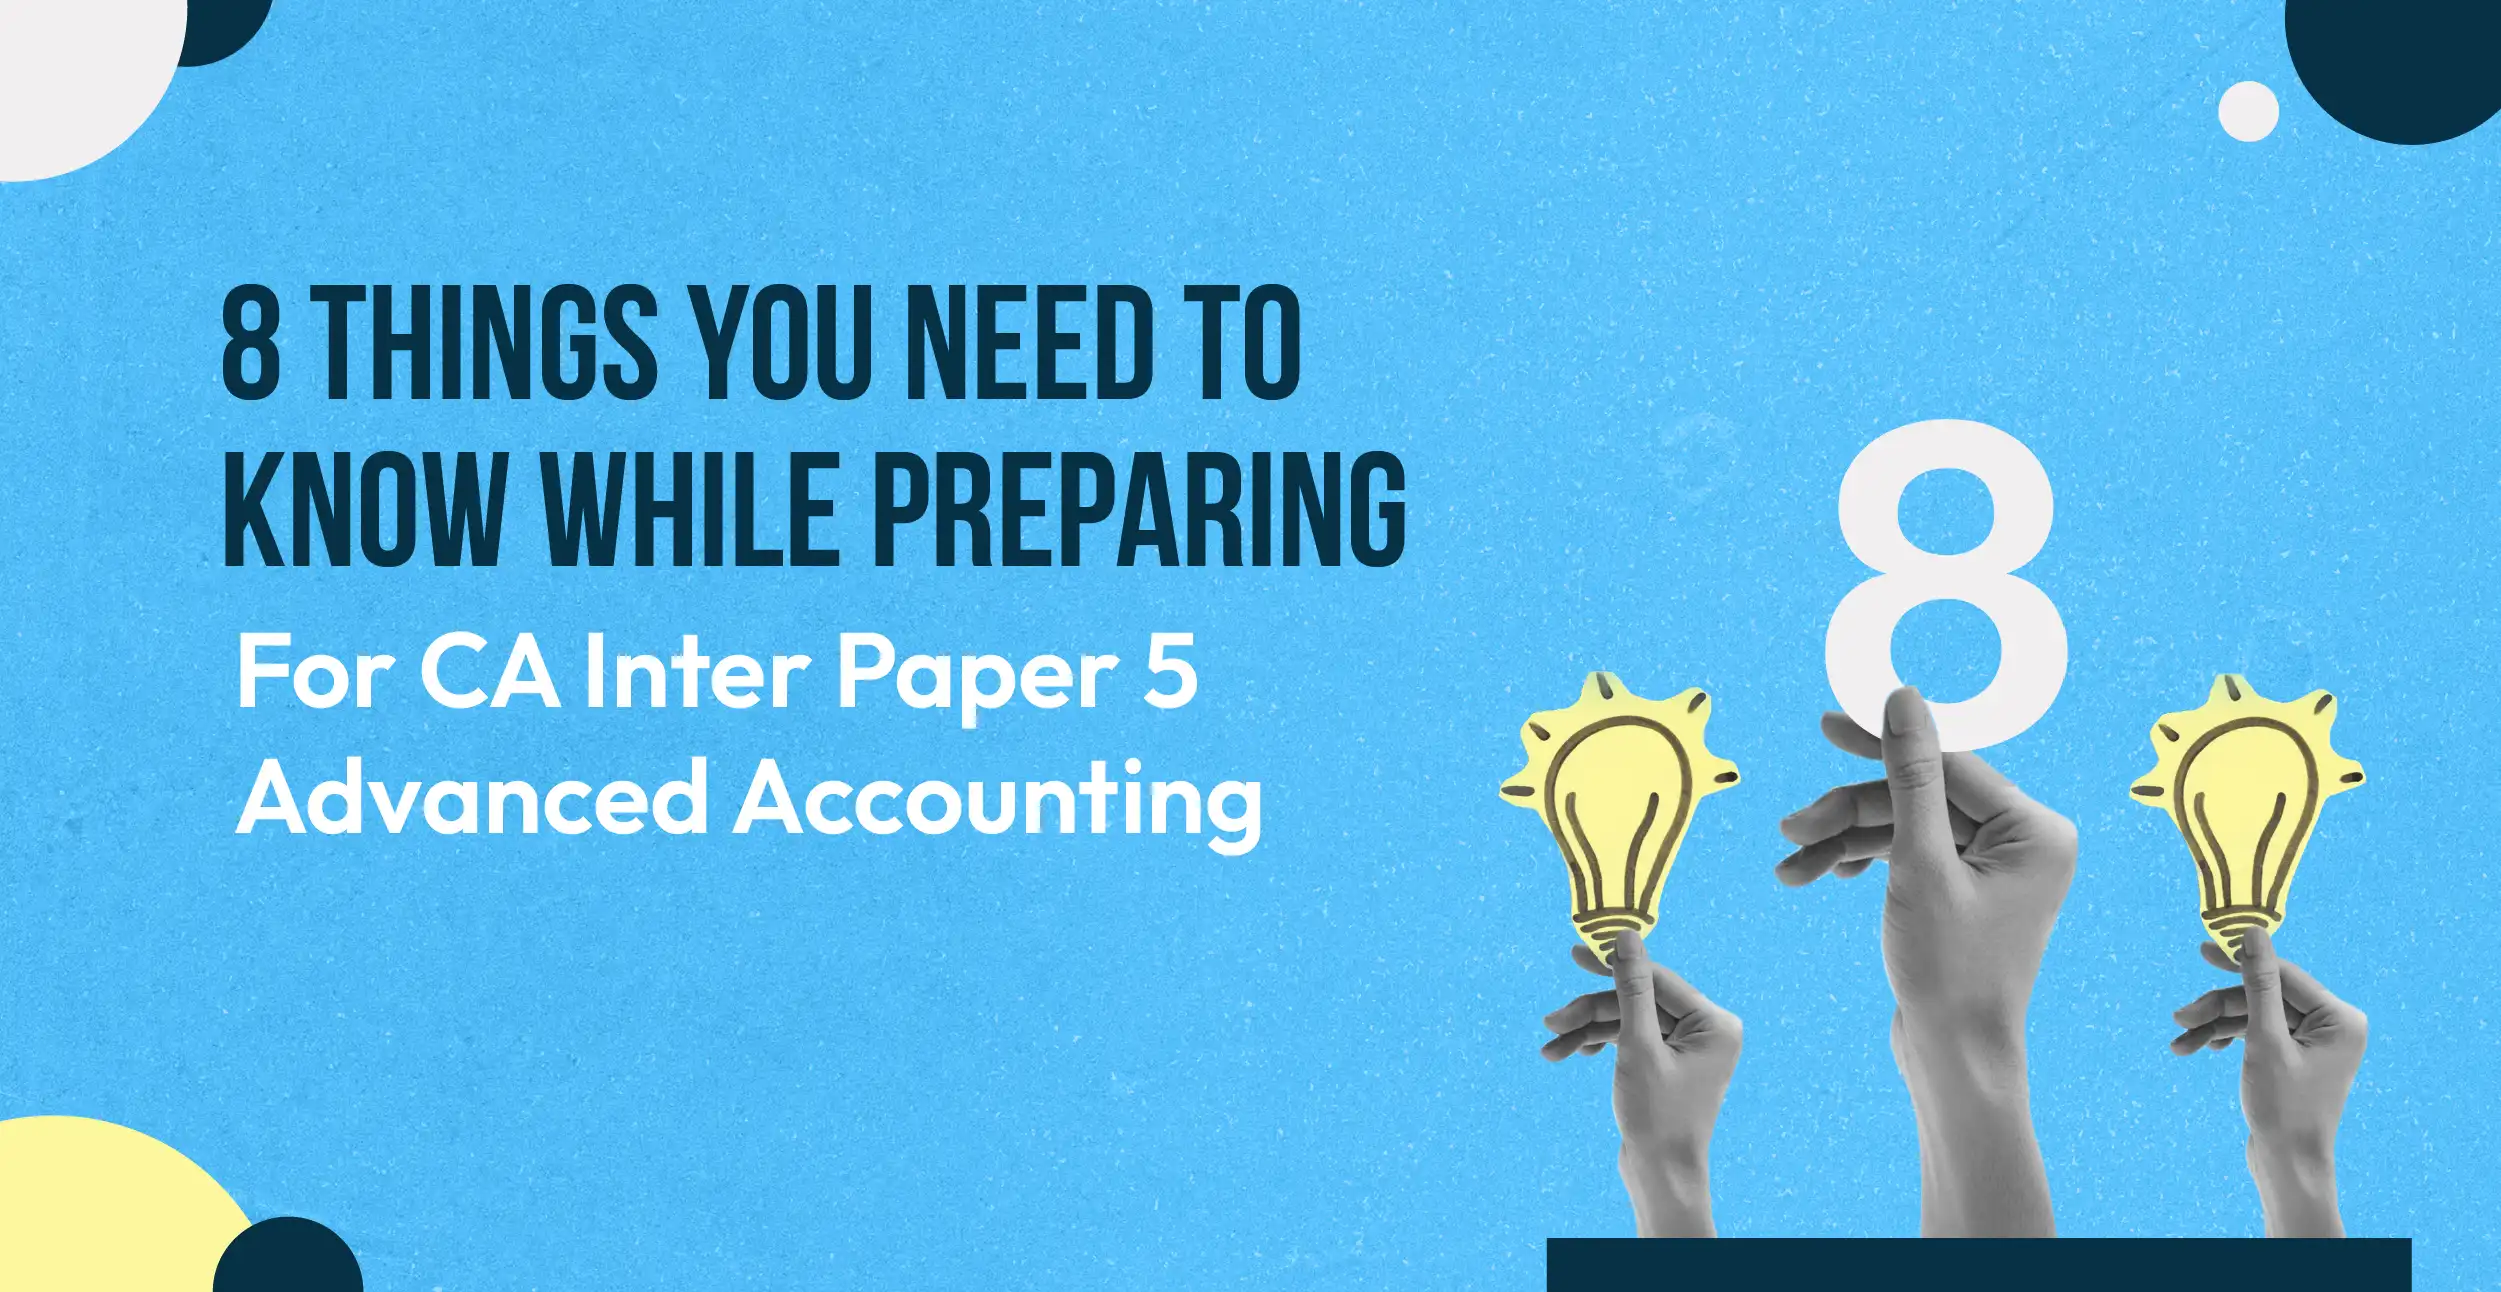 8 things you need to know about CA Inter Advanced Accounting